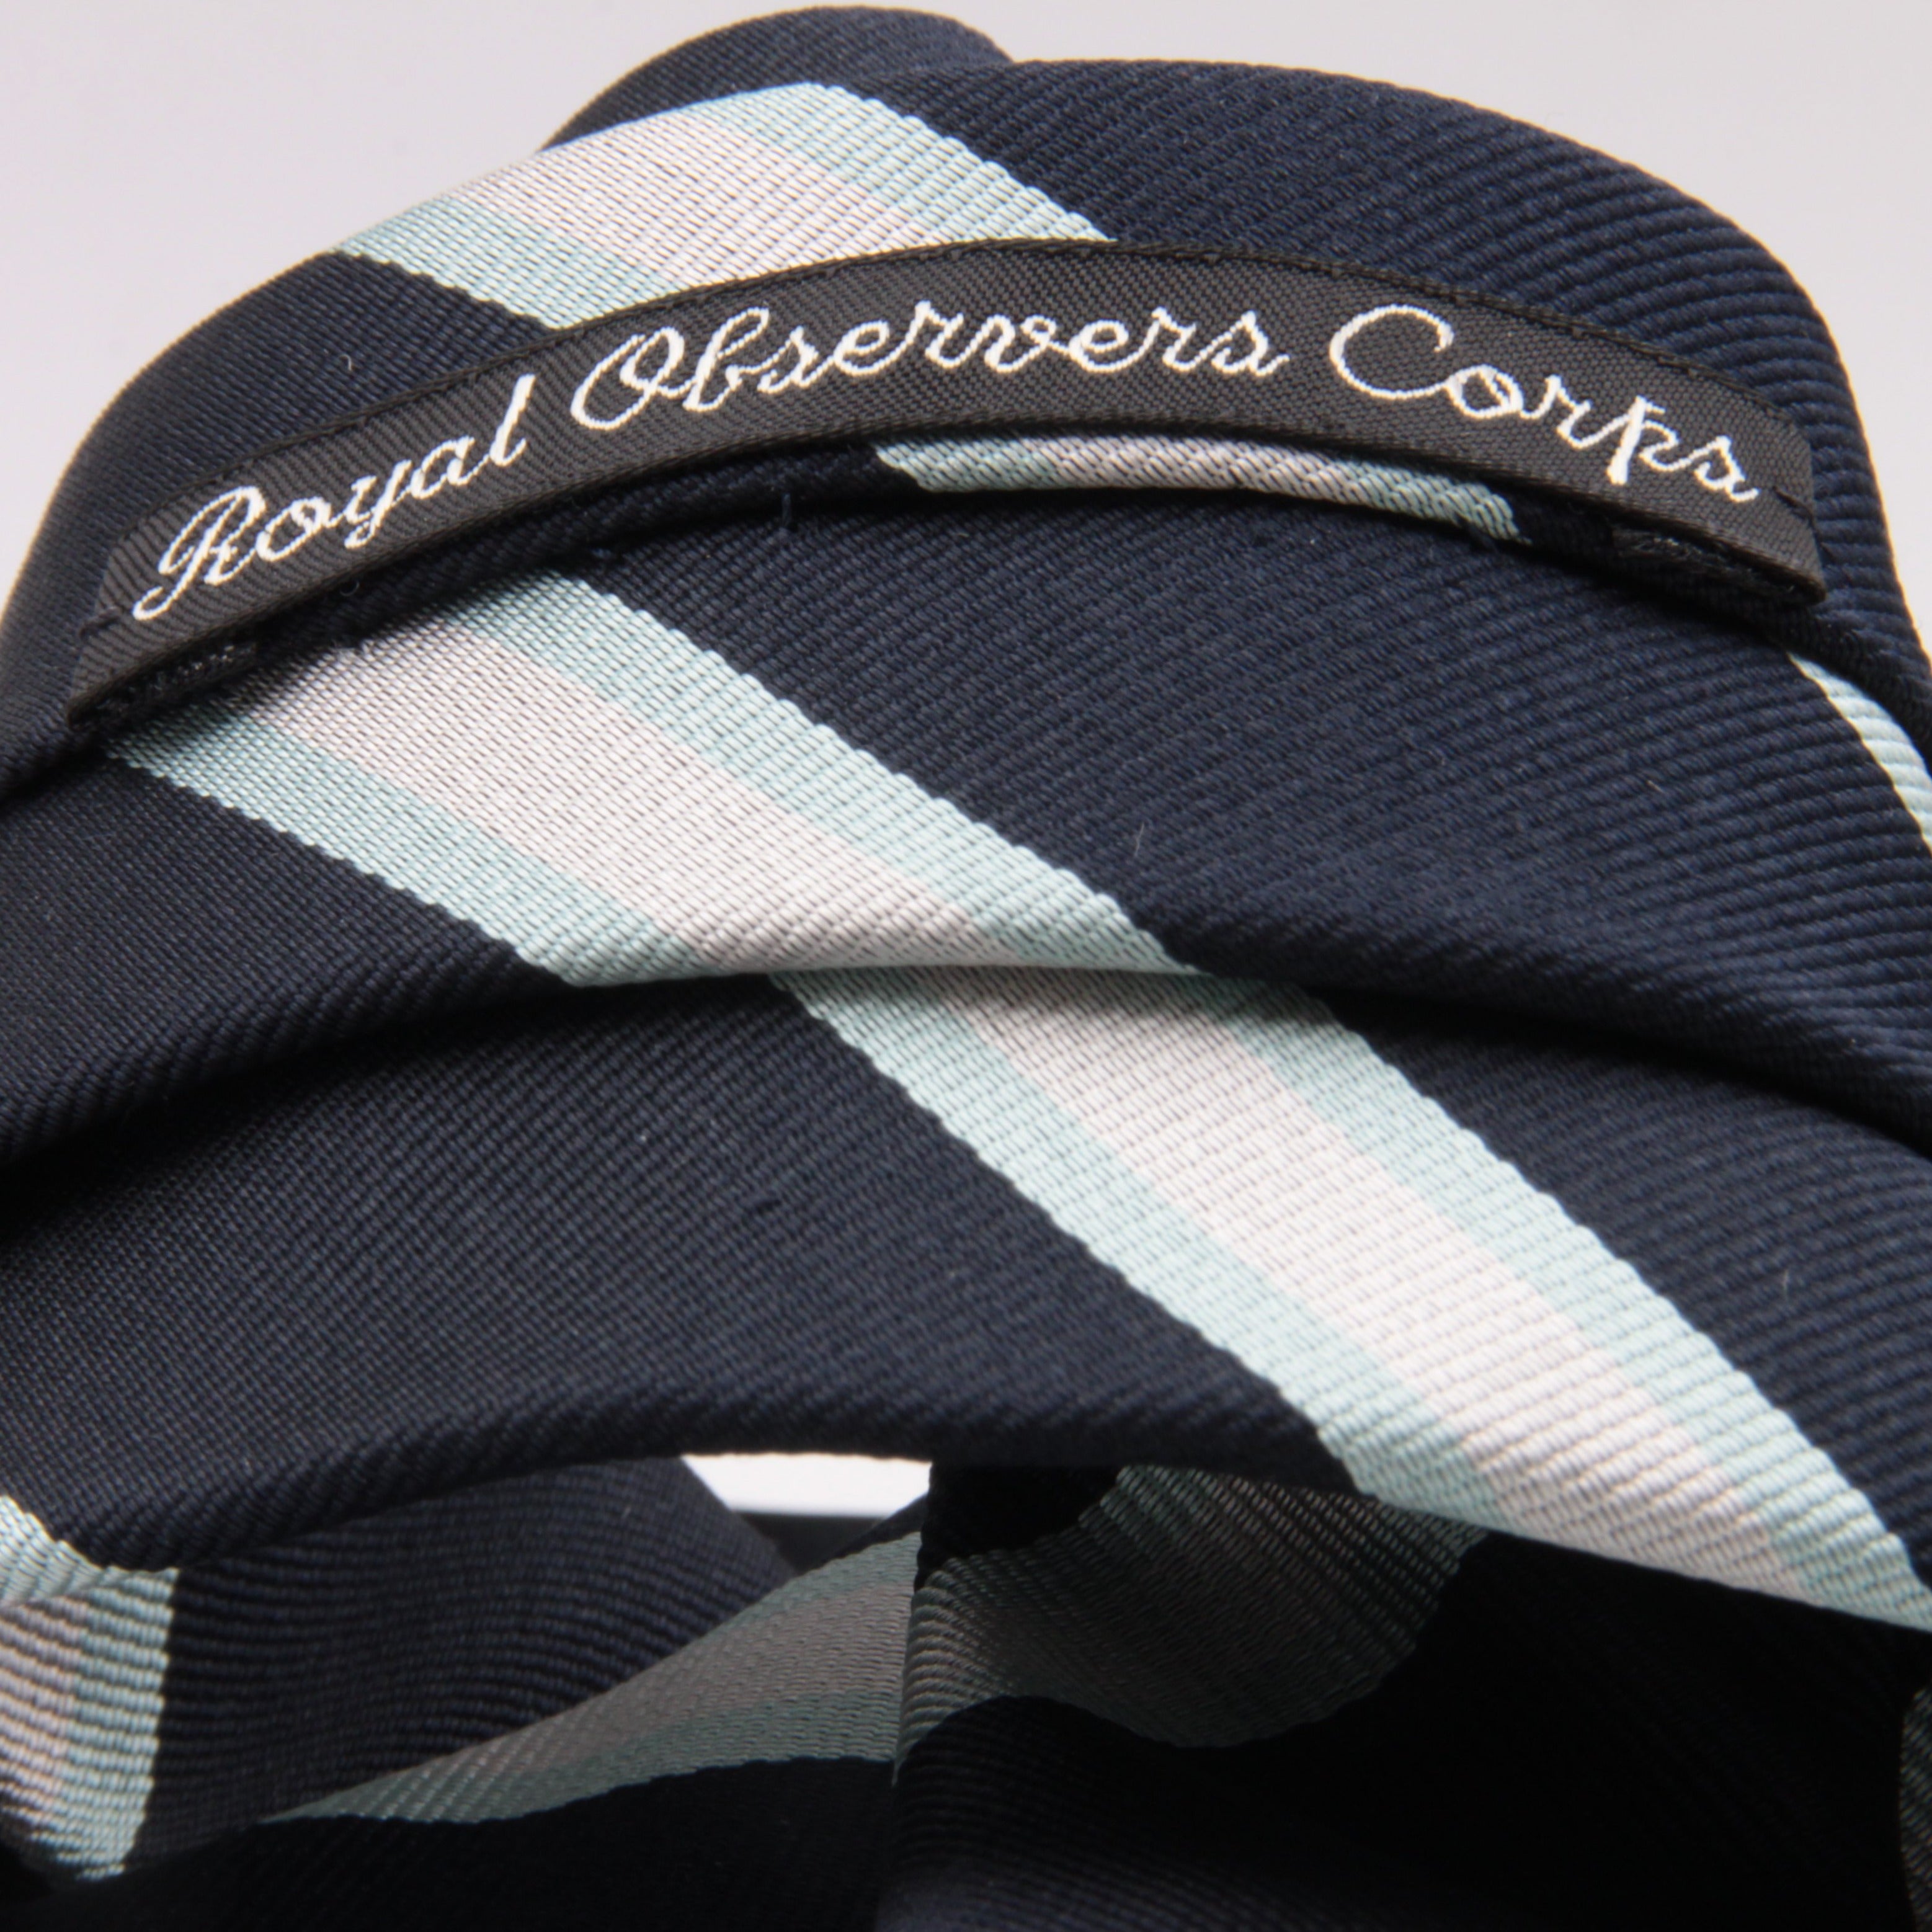 Holliday & Brown for Cruciani & Bella 100% Silk Jacquard  Regimental "Royal Observers Corps" Blue, Light Blue and White stripes tie Handmade in Italy 8 cm x 150 cm #5122